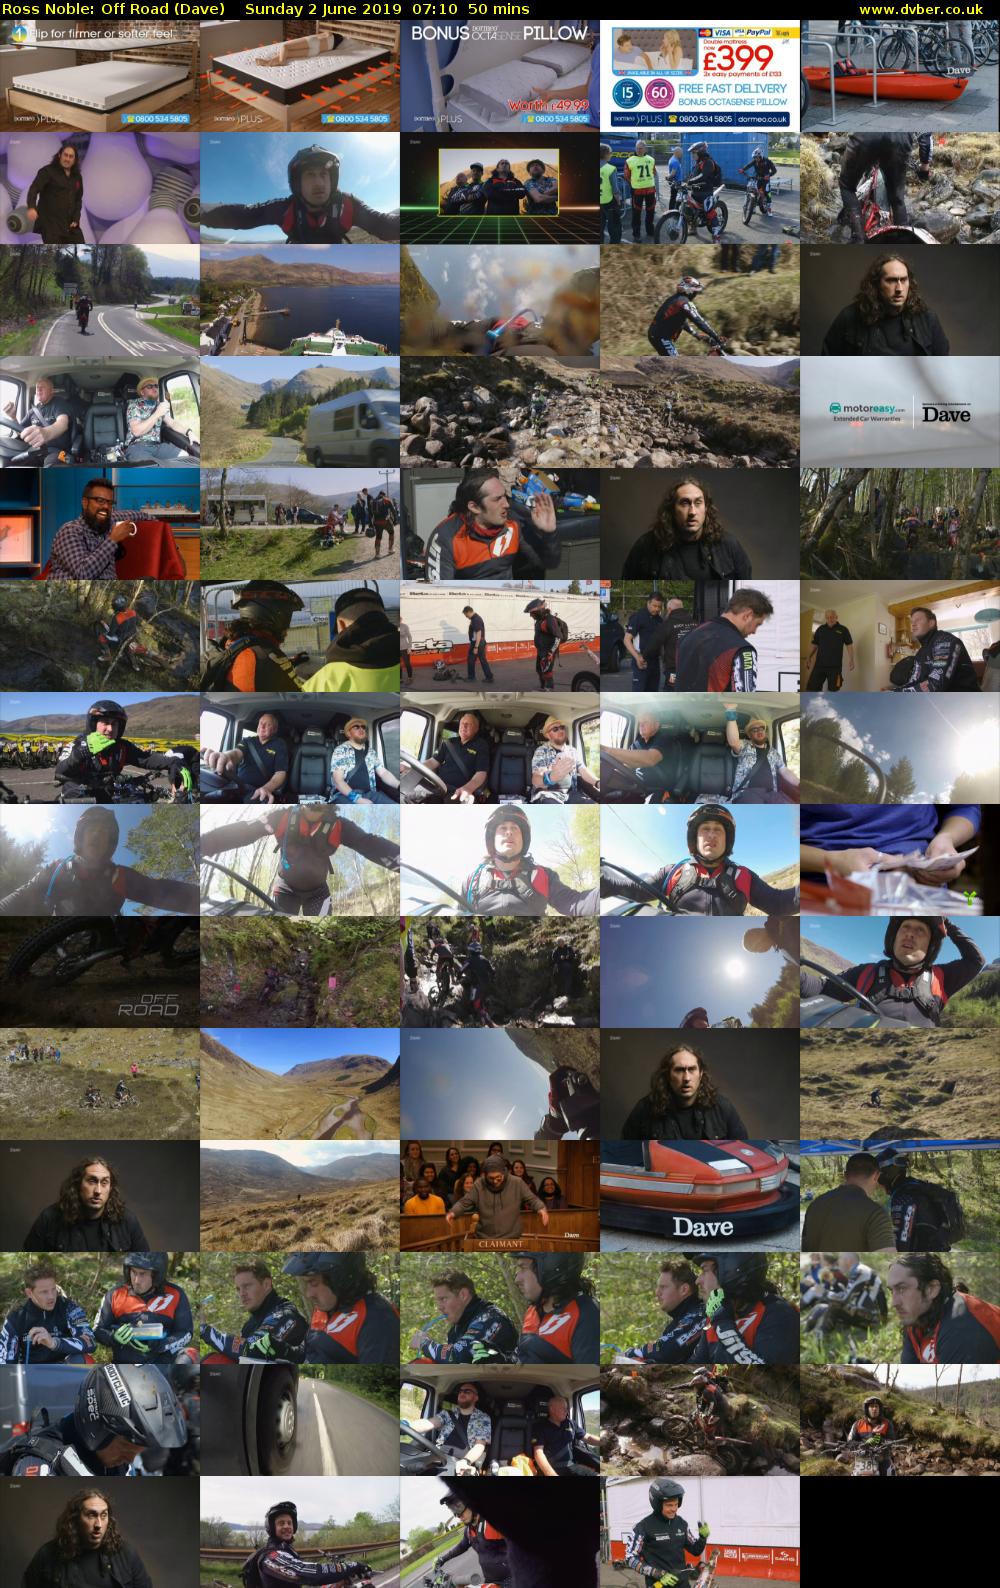 Ross Noble: Off Road (Dave) Sunday 2 June 2019 07:10 - 08:00